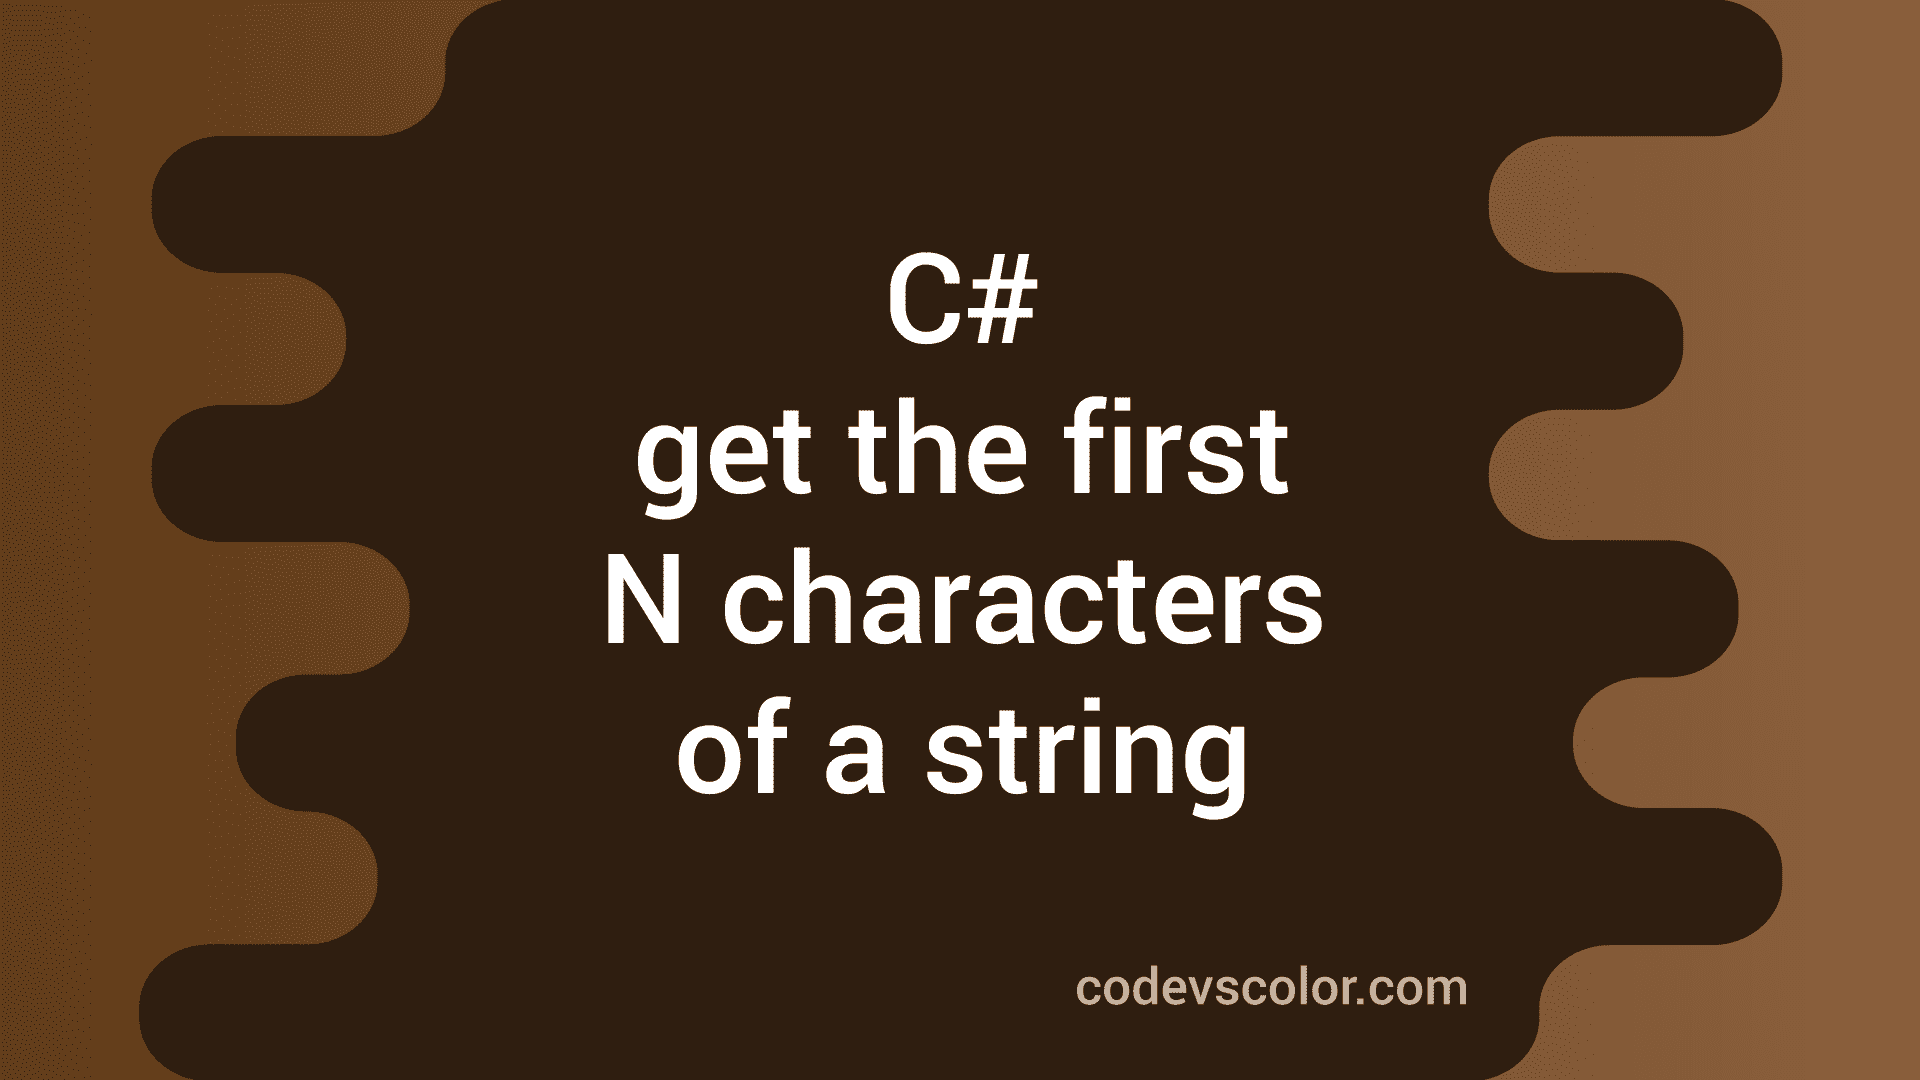 c-program-to-get-the-first-n-characters-of-a-string-codevscolor